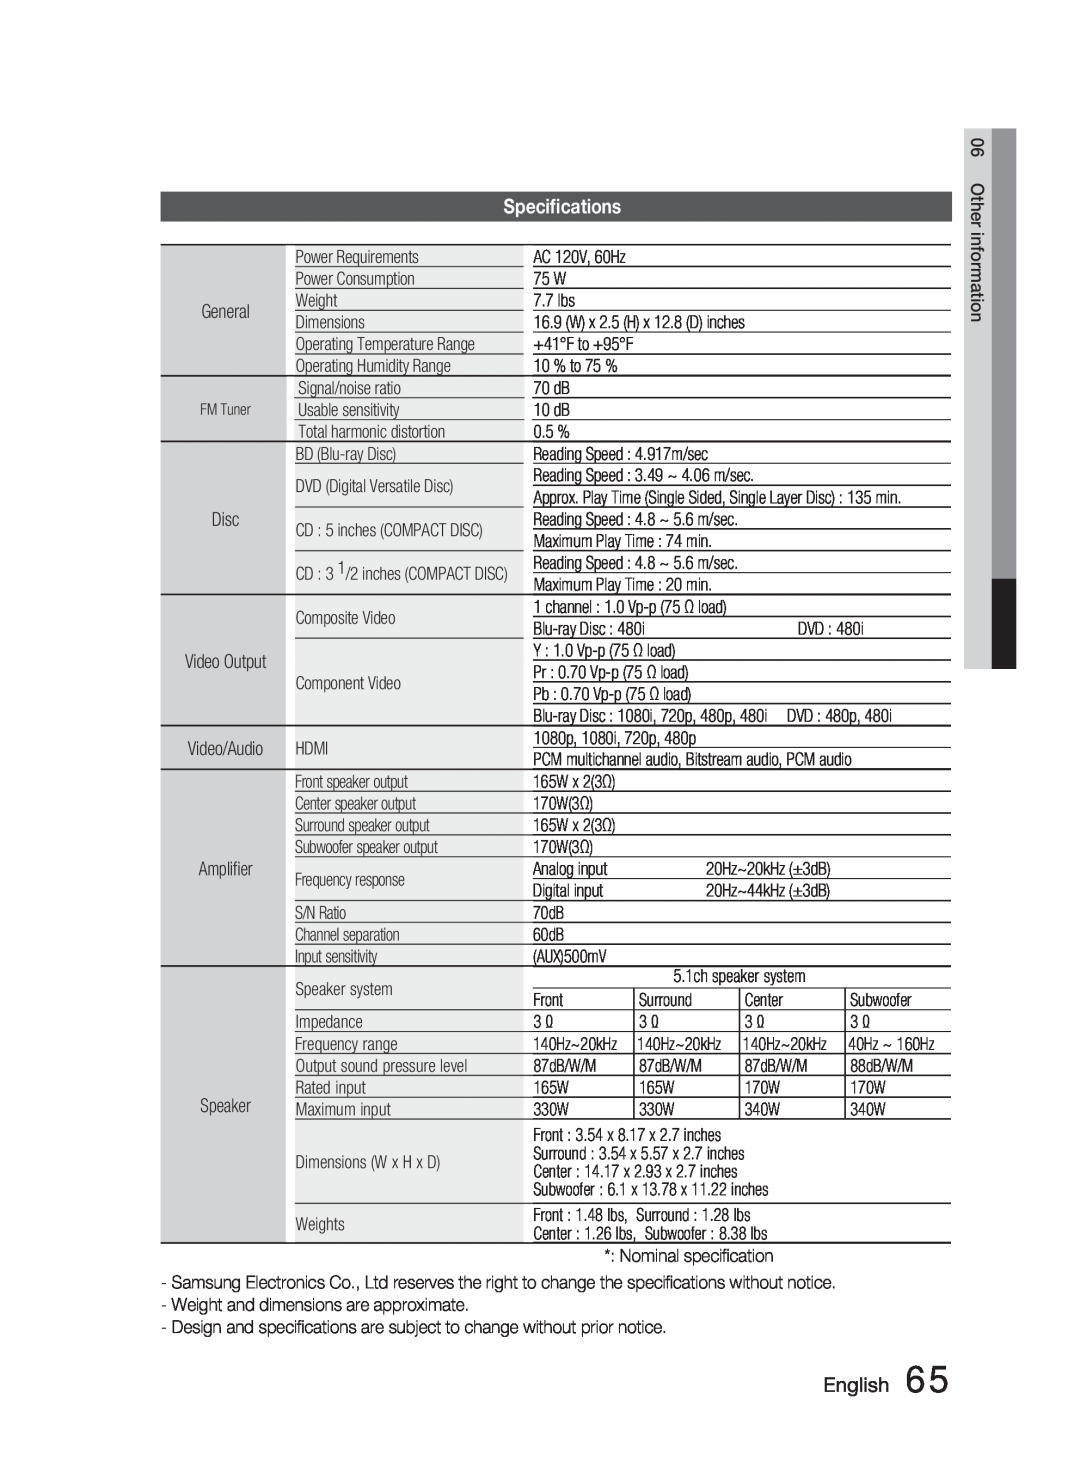 Samsung HT-C5500 user manual Speciﬁcations, English 